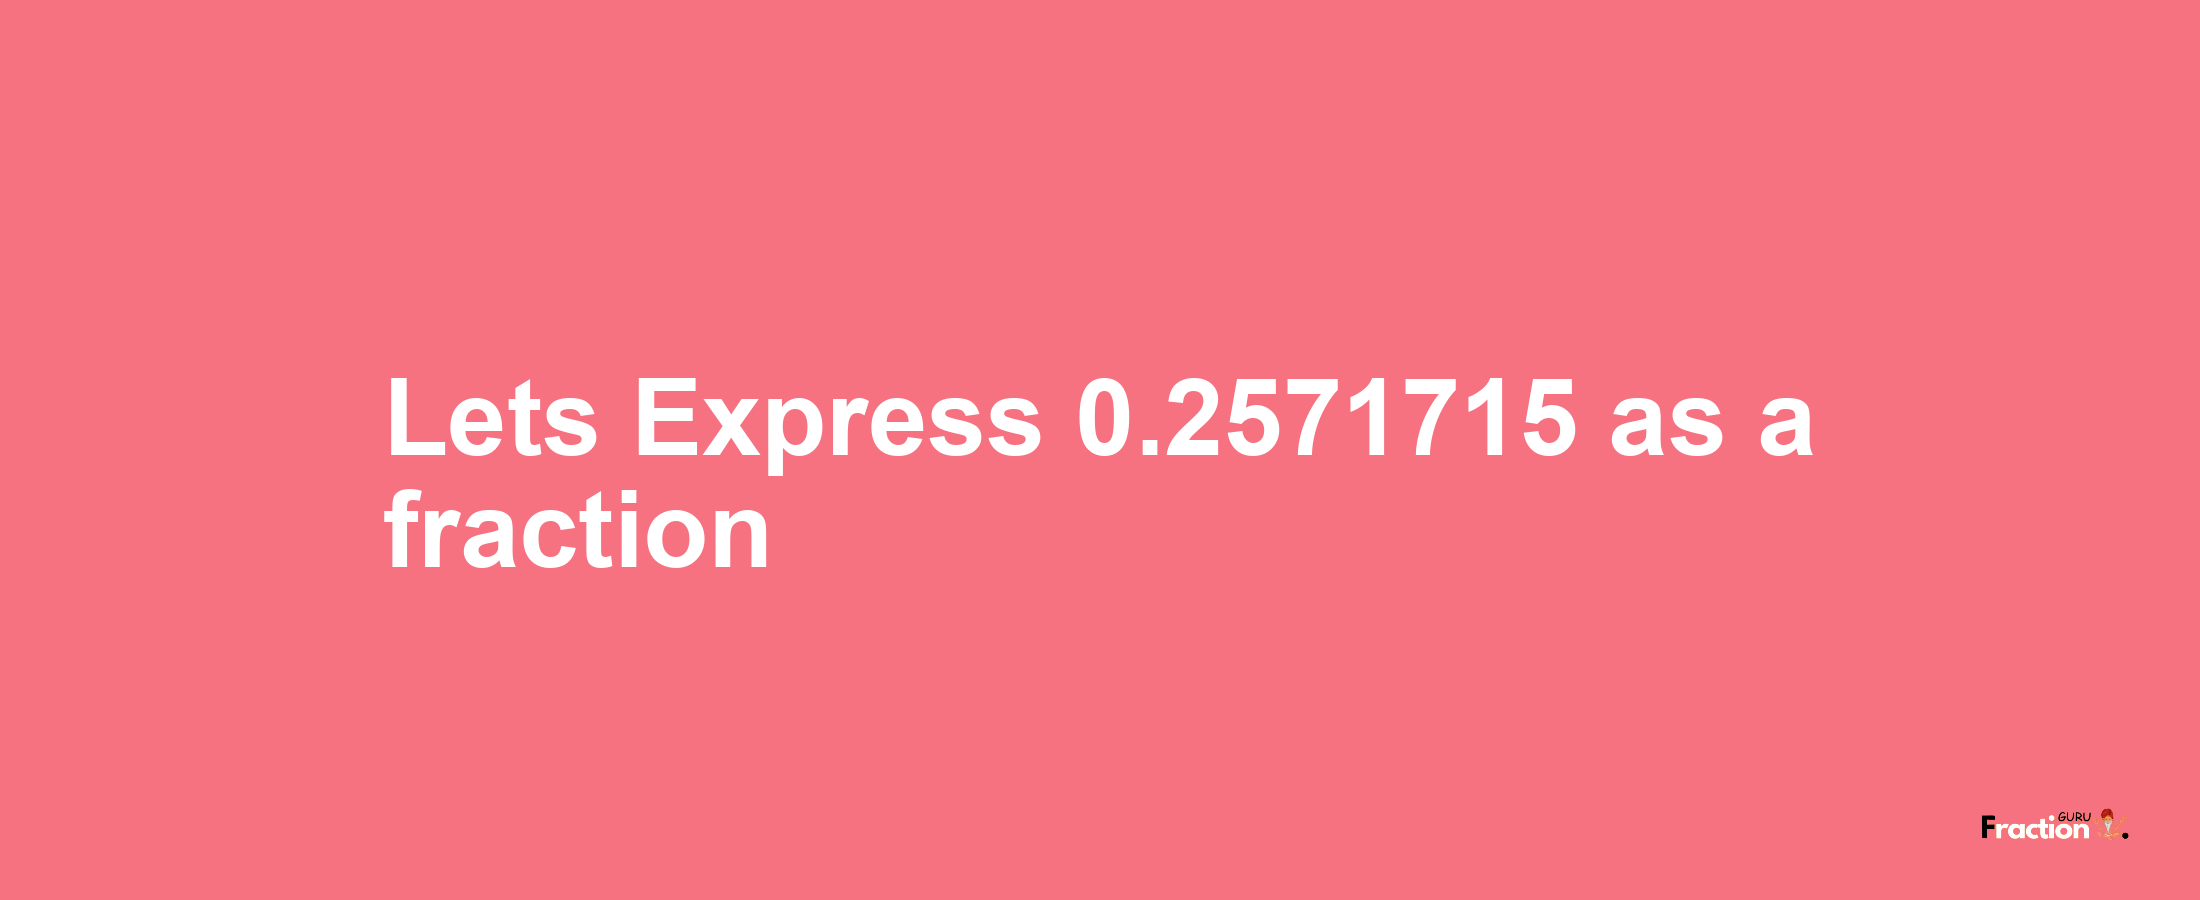 Lets Express 0.2571715 as afraction